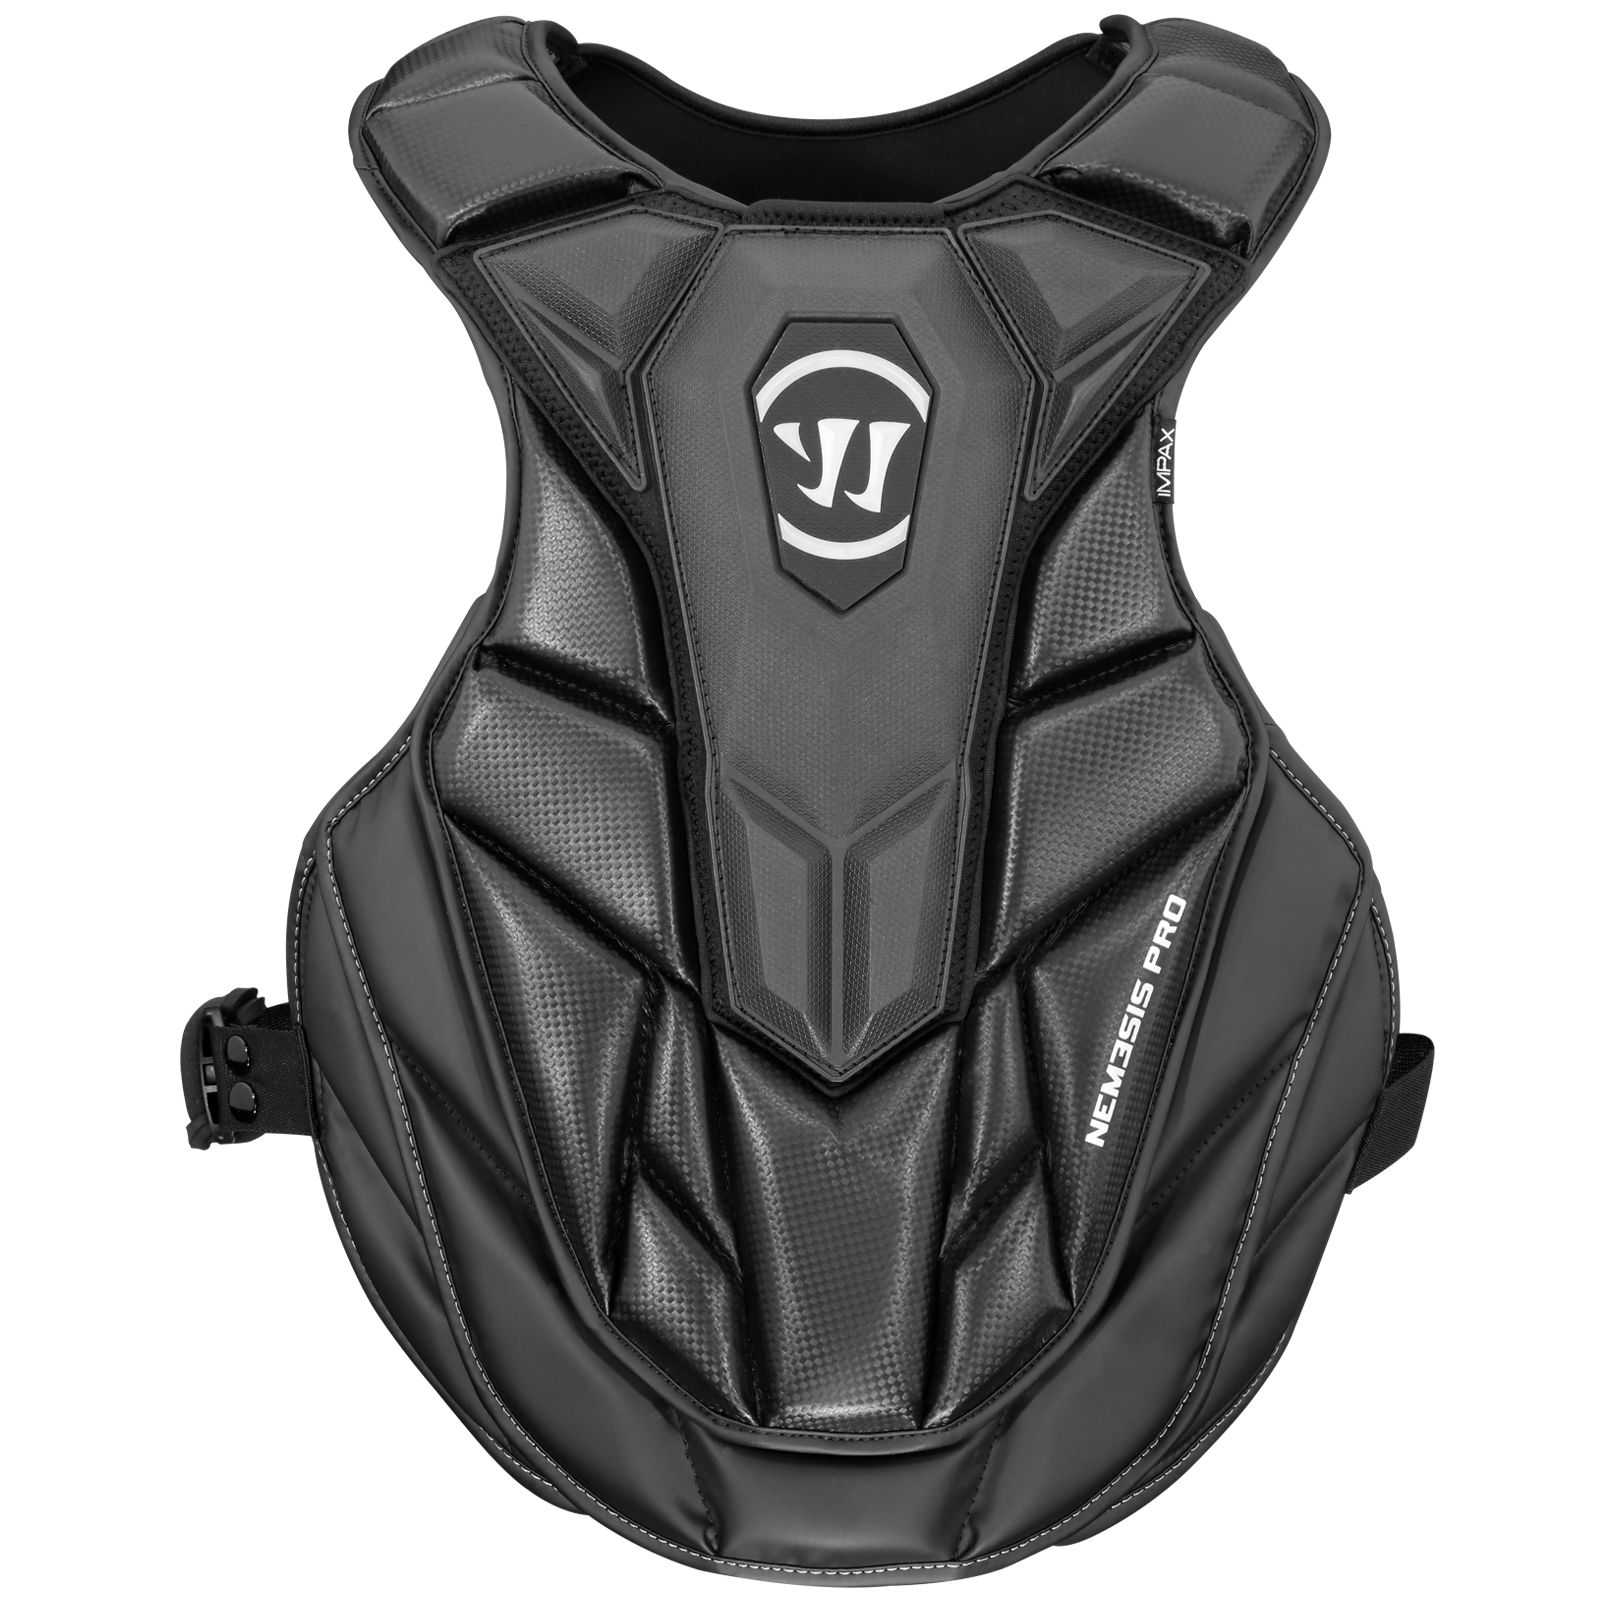 Nemesis Pro Chest Protector, Black image number 0